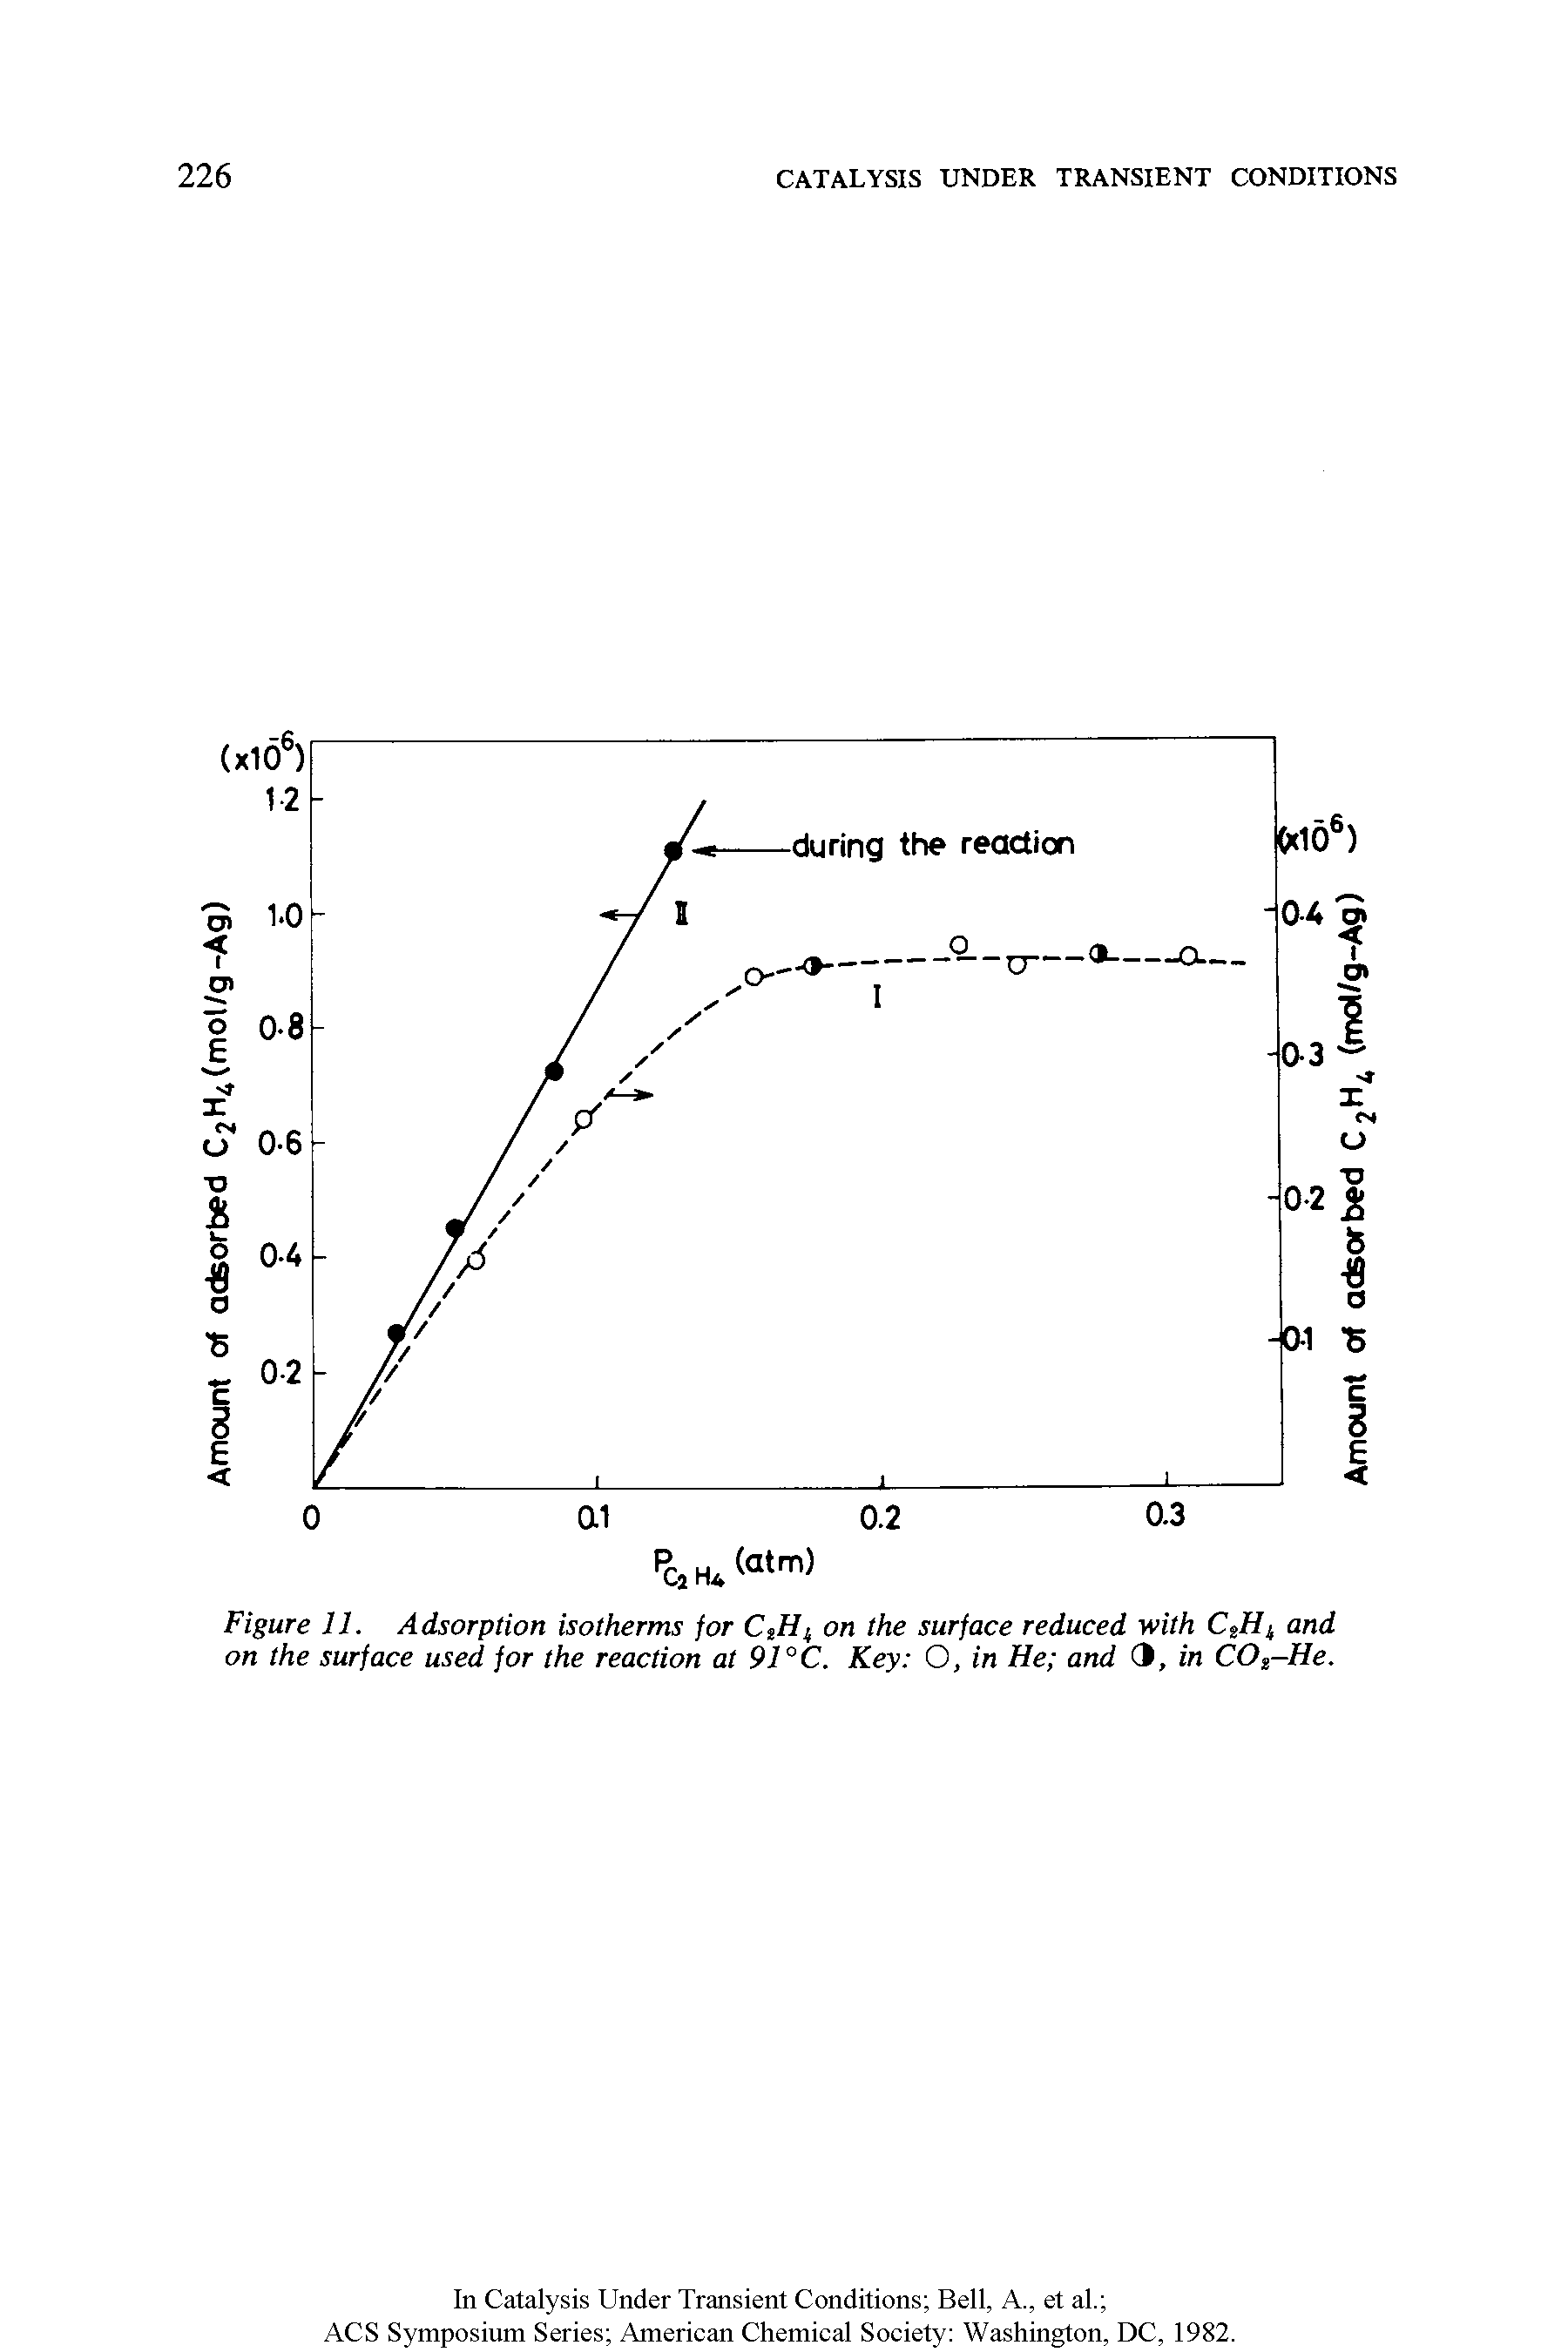 Figure 11. Adsorption isotherms for CsHi on the surface reduced with CtHi and on the surface used for the reaction at 91 °C. Key O, in He and 3, in C02-He.